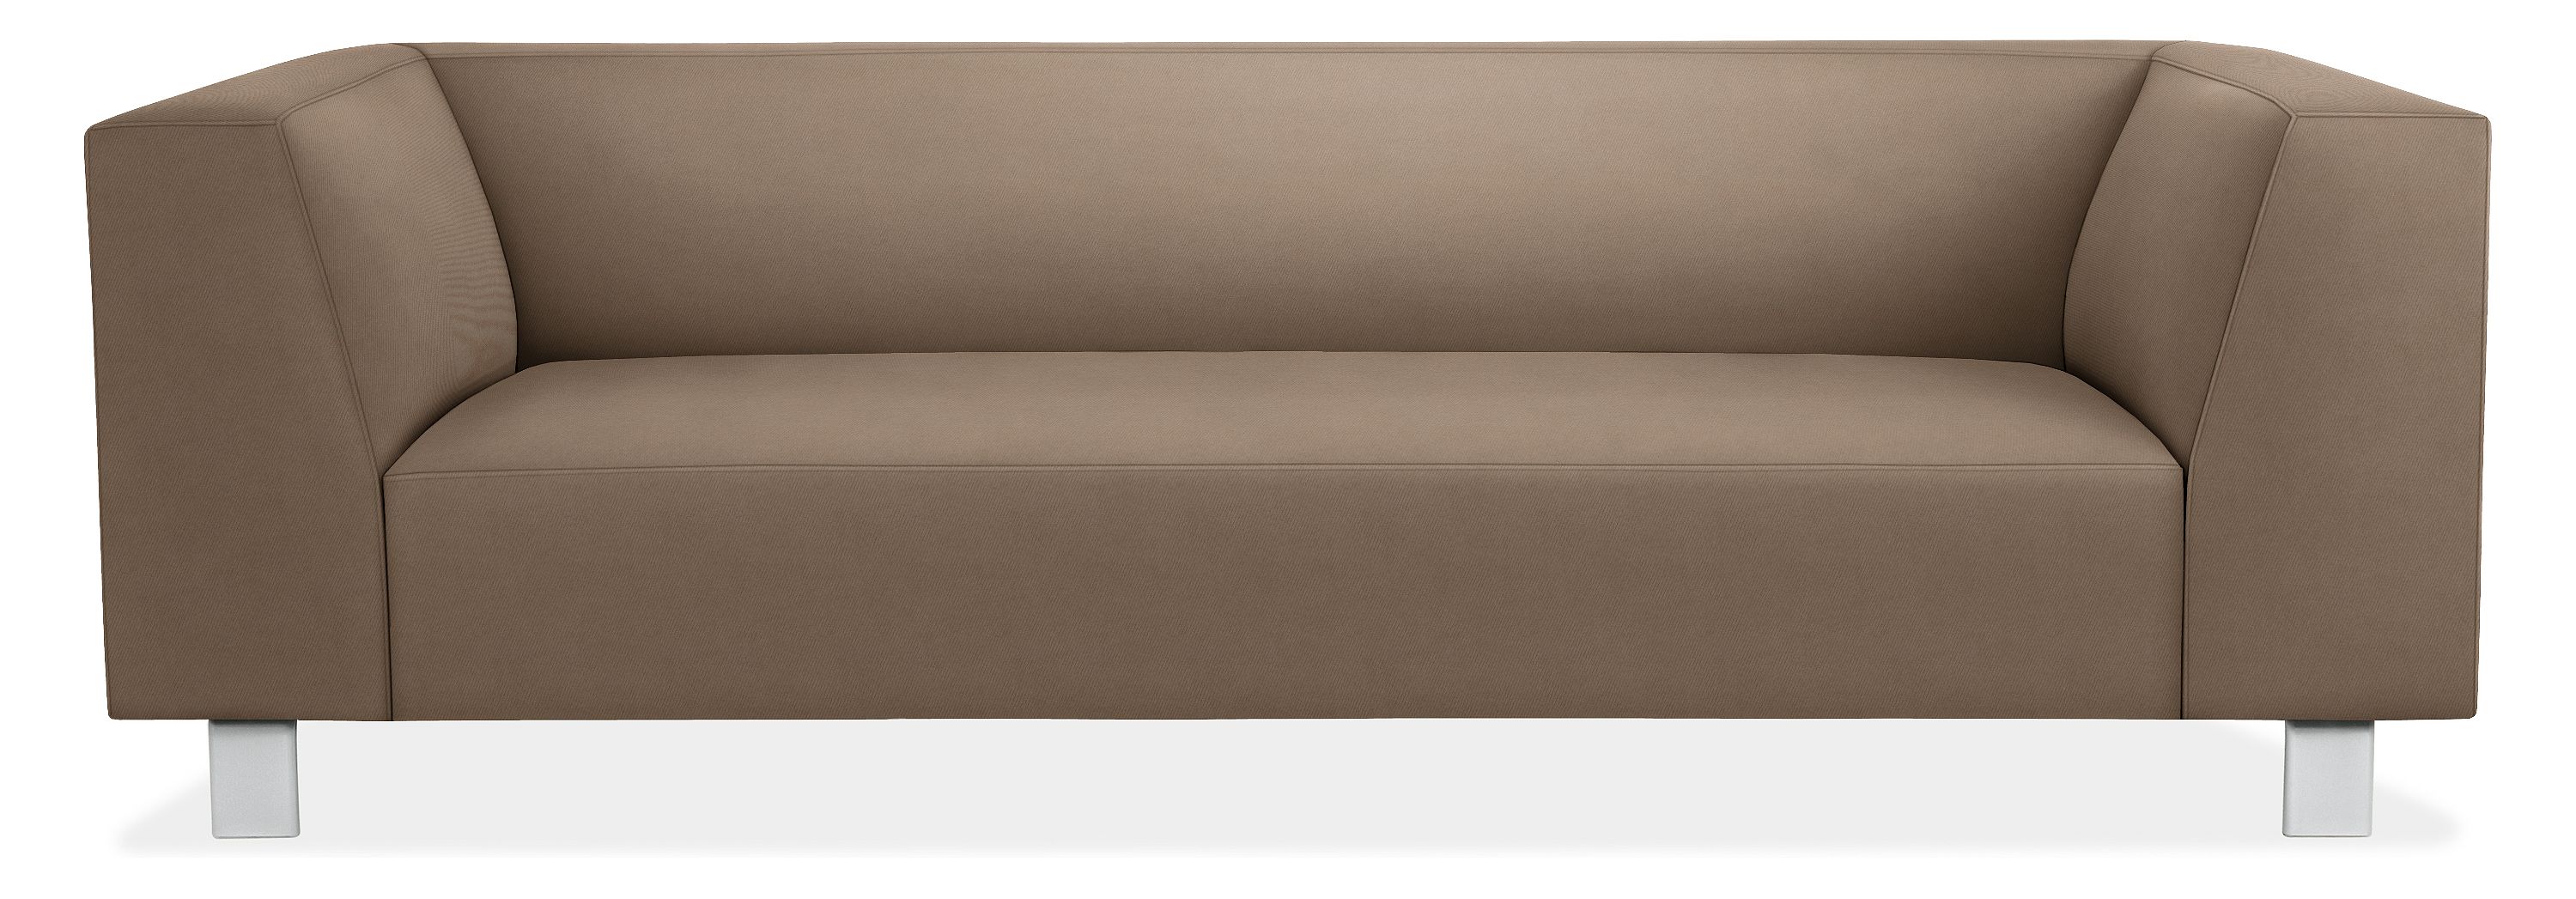 Chelsea 94 Sofa In Doss Taupe